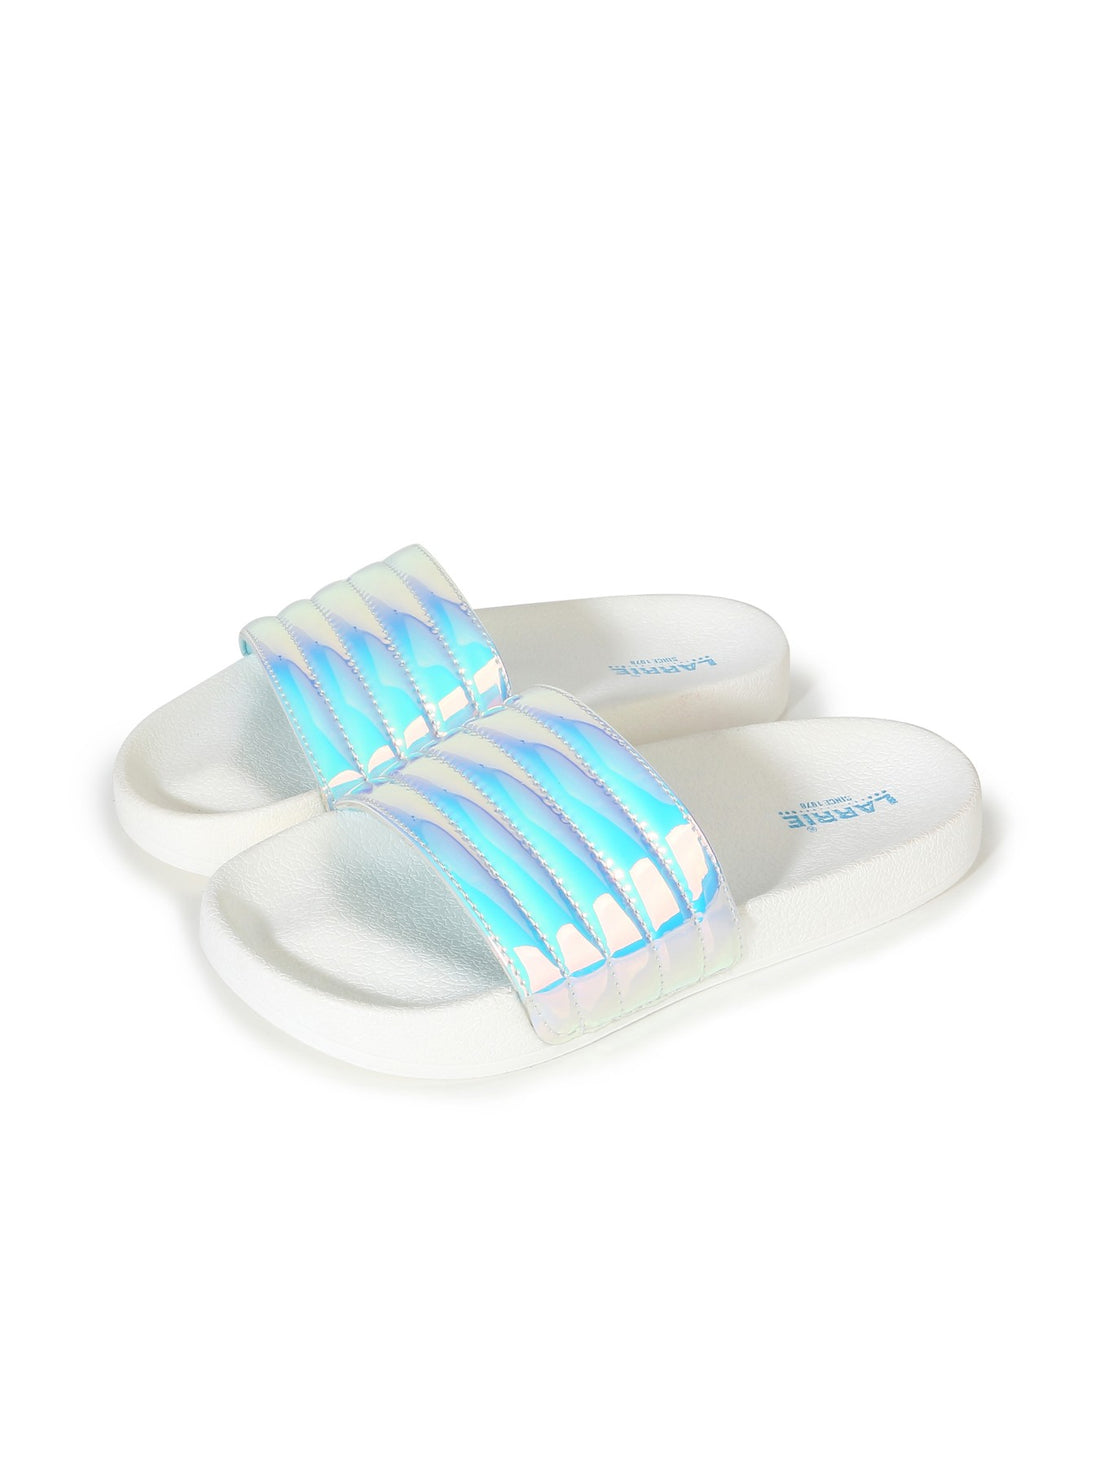 Larrie White Super Sporty Comfy Sandals